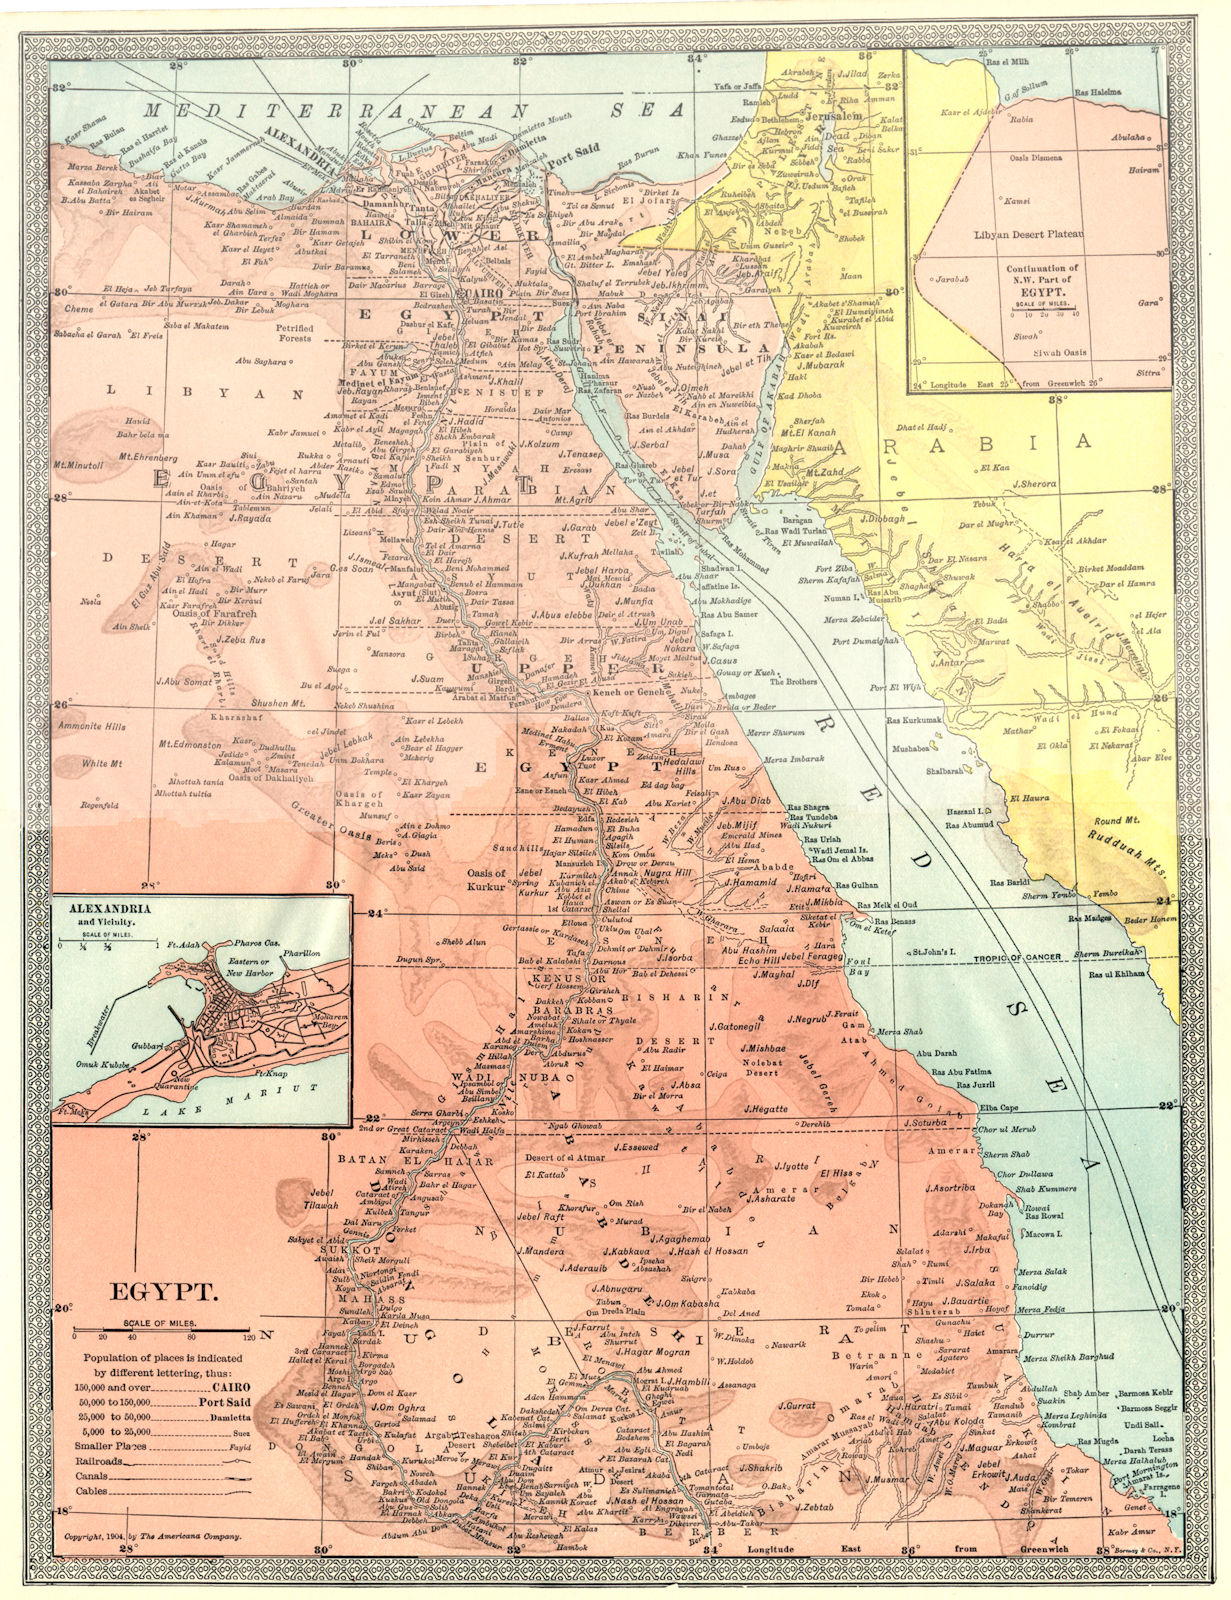 EGYPT. Nile valley. Red Sea. Inset Alexandria 1907 old antique map plan chart